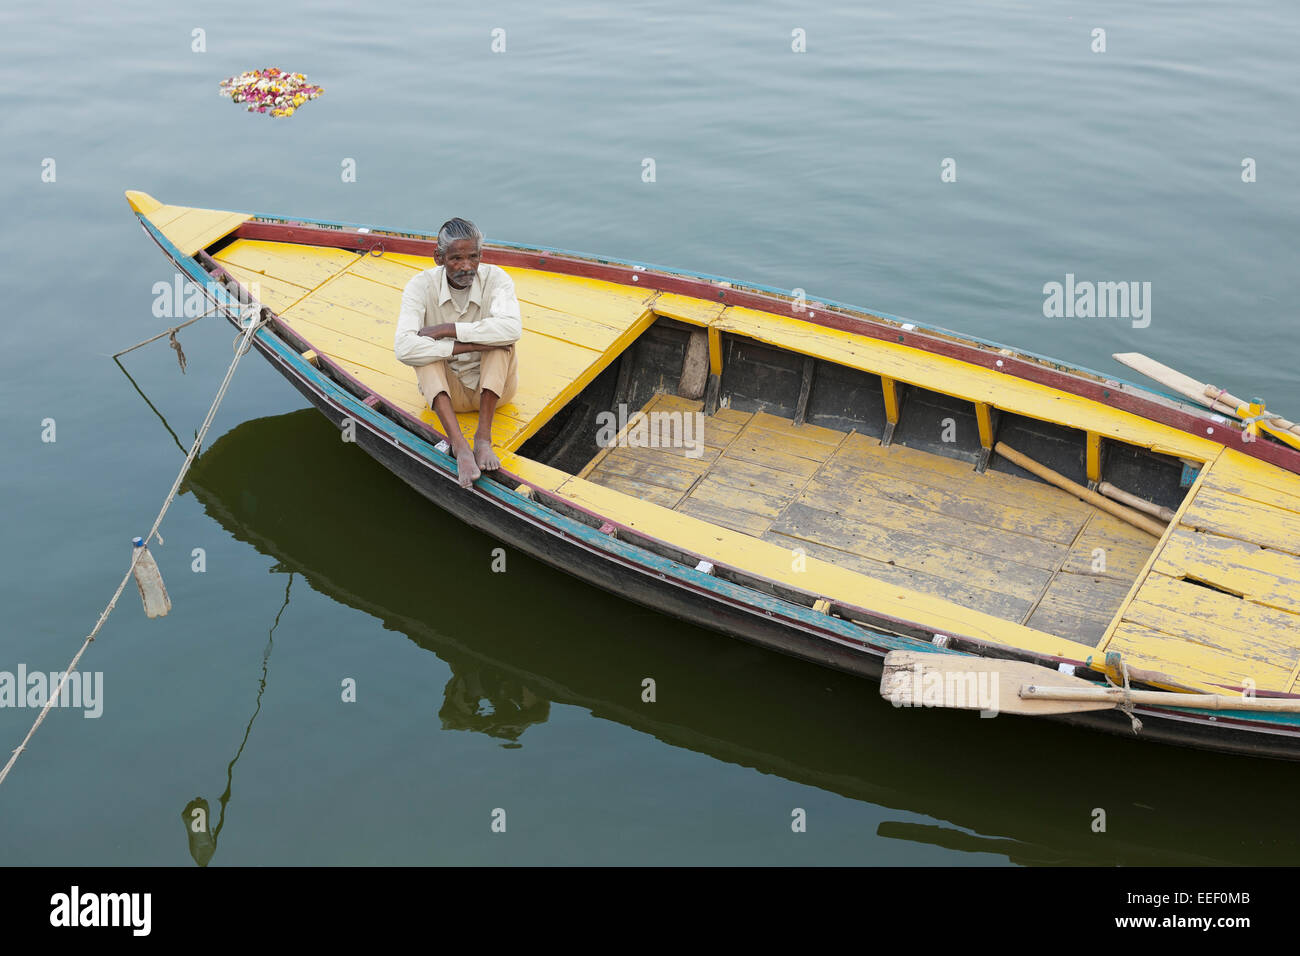 Varanasi, India. Row boat on the Ganges river. Boatman waiting for customers, votive flowers floating by Stock Photo